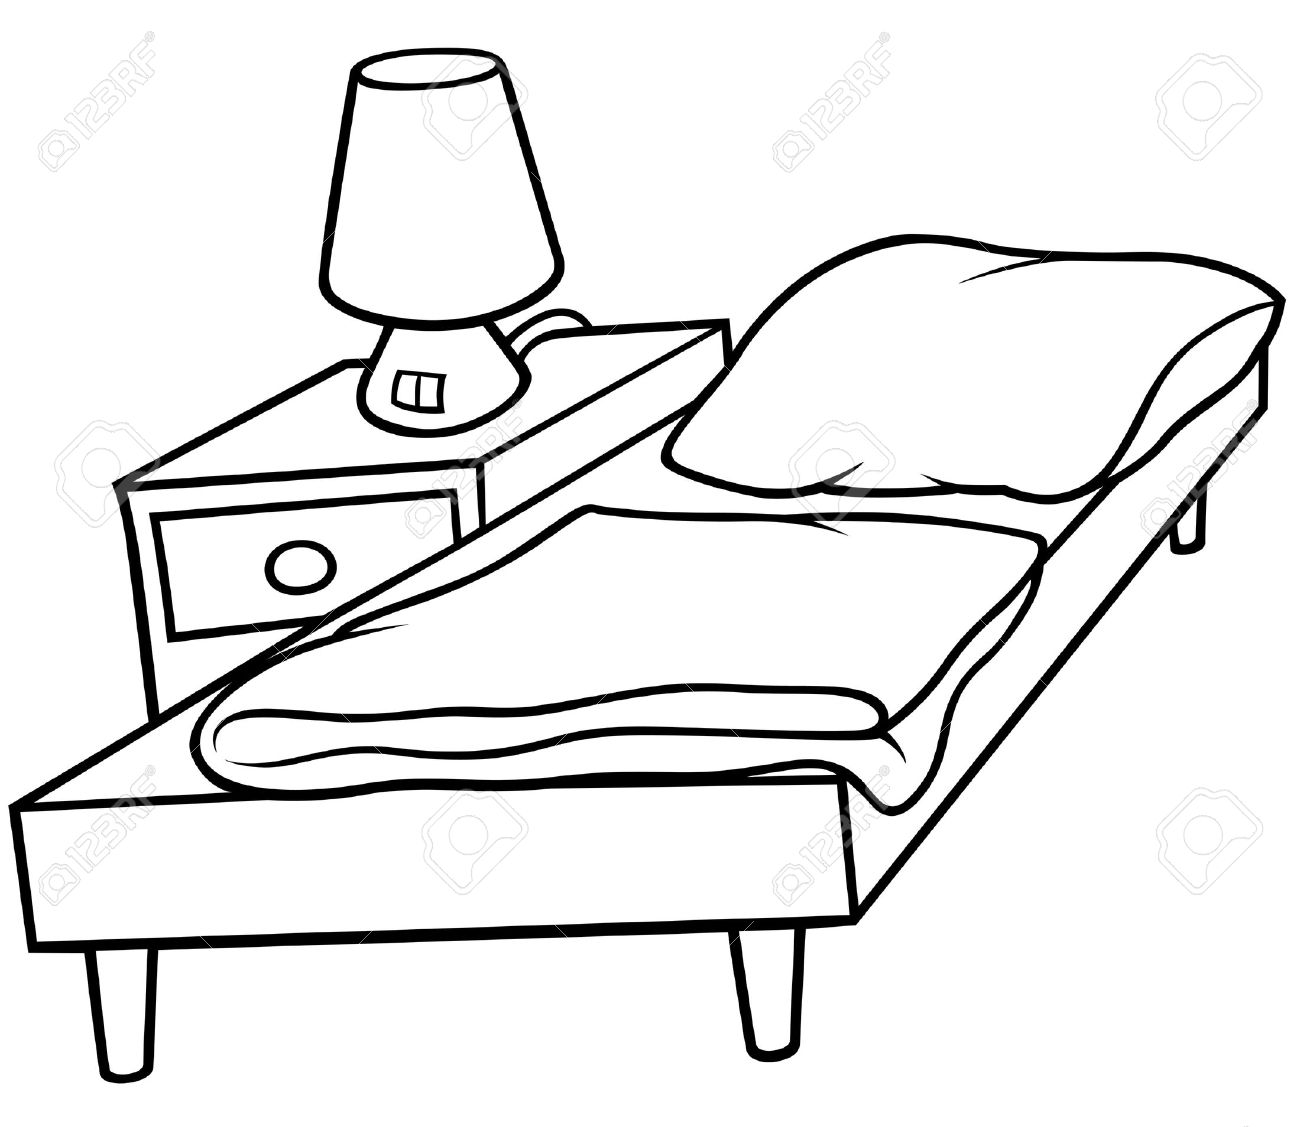 Bed and Bedside - Black and White Cartoon illustration, Vector Stock Vector - 8756116